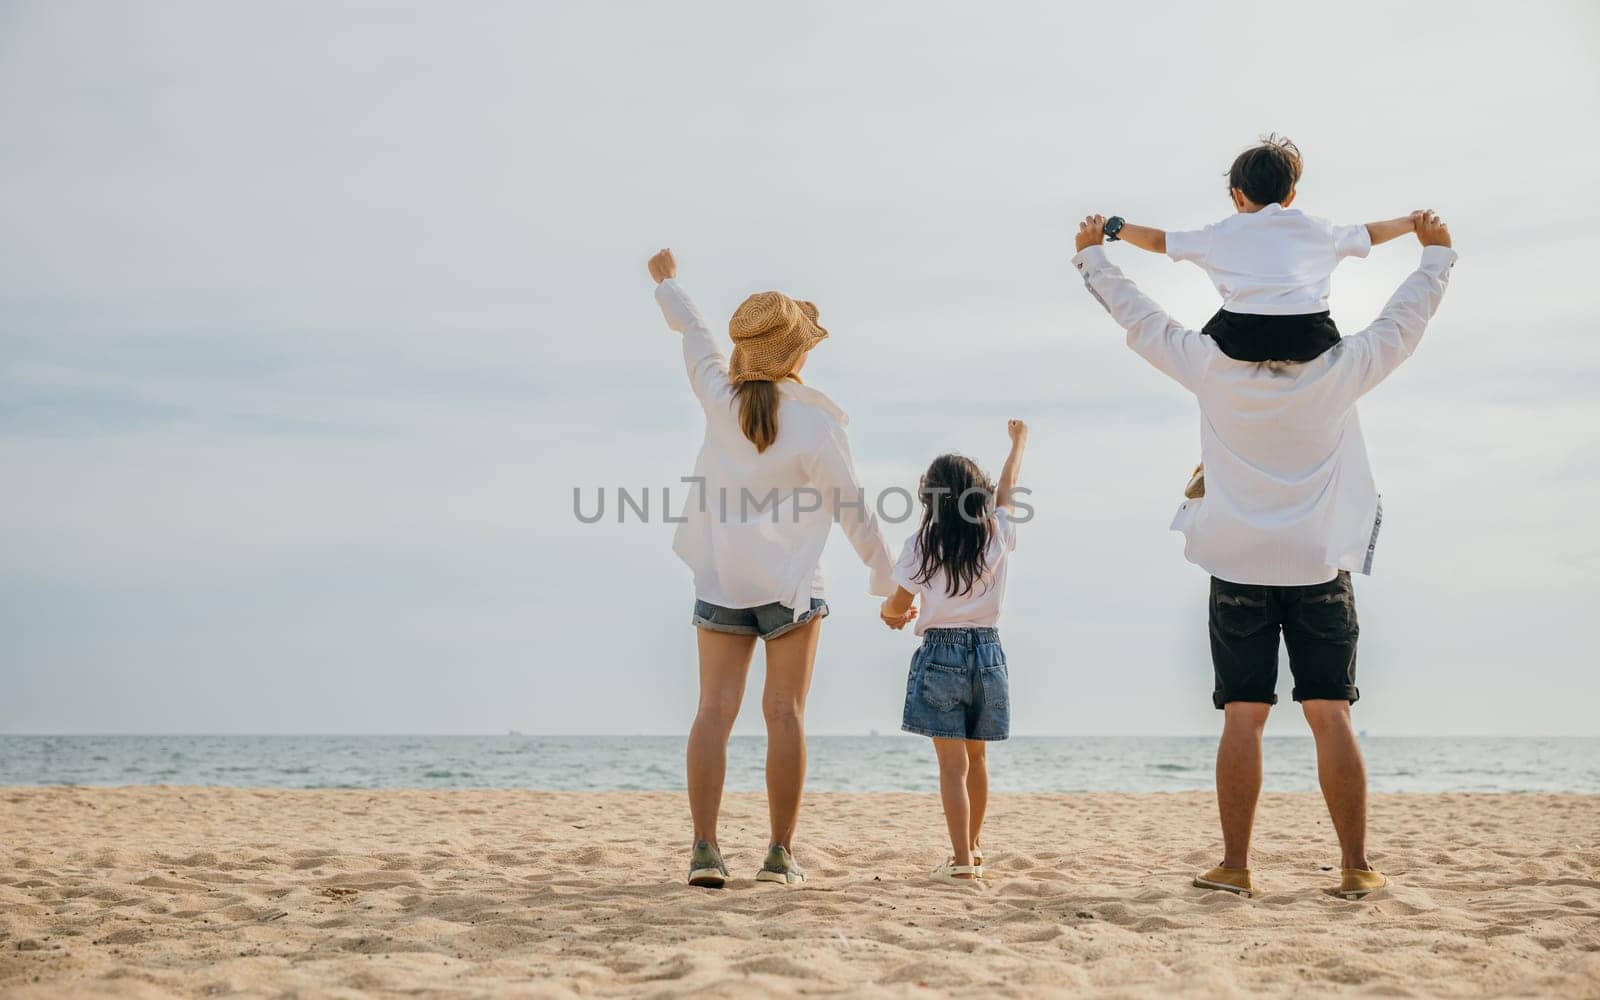 A joyful family of four stands with raised arms at the sea beach during sunset. Father carries his son on shoulders capturing the carefree moments of a delightful summer vacation. by Sorapop